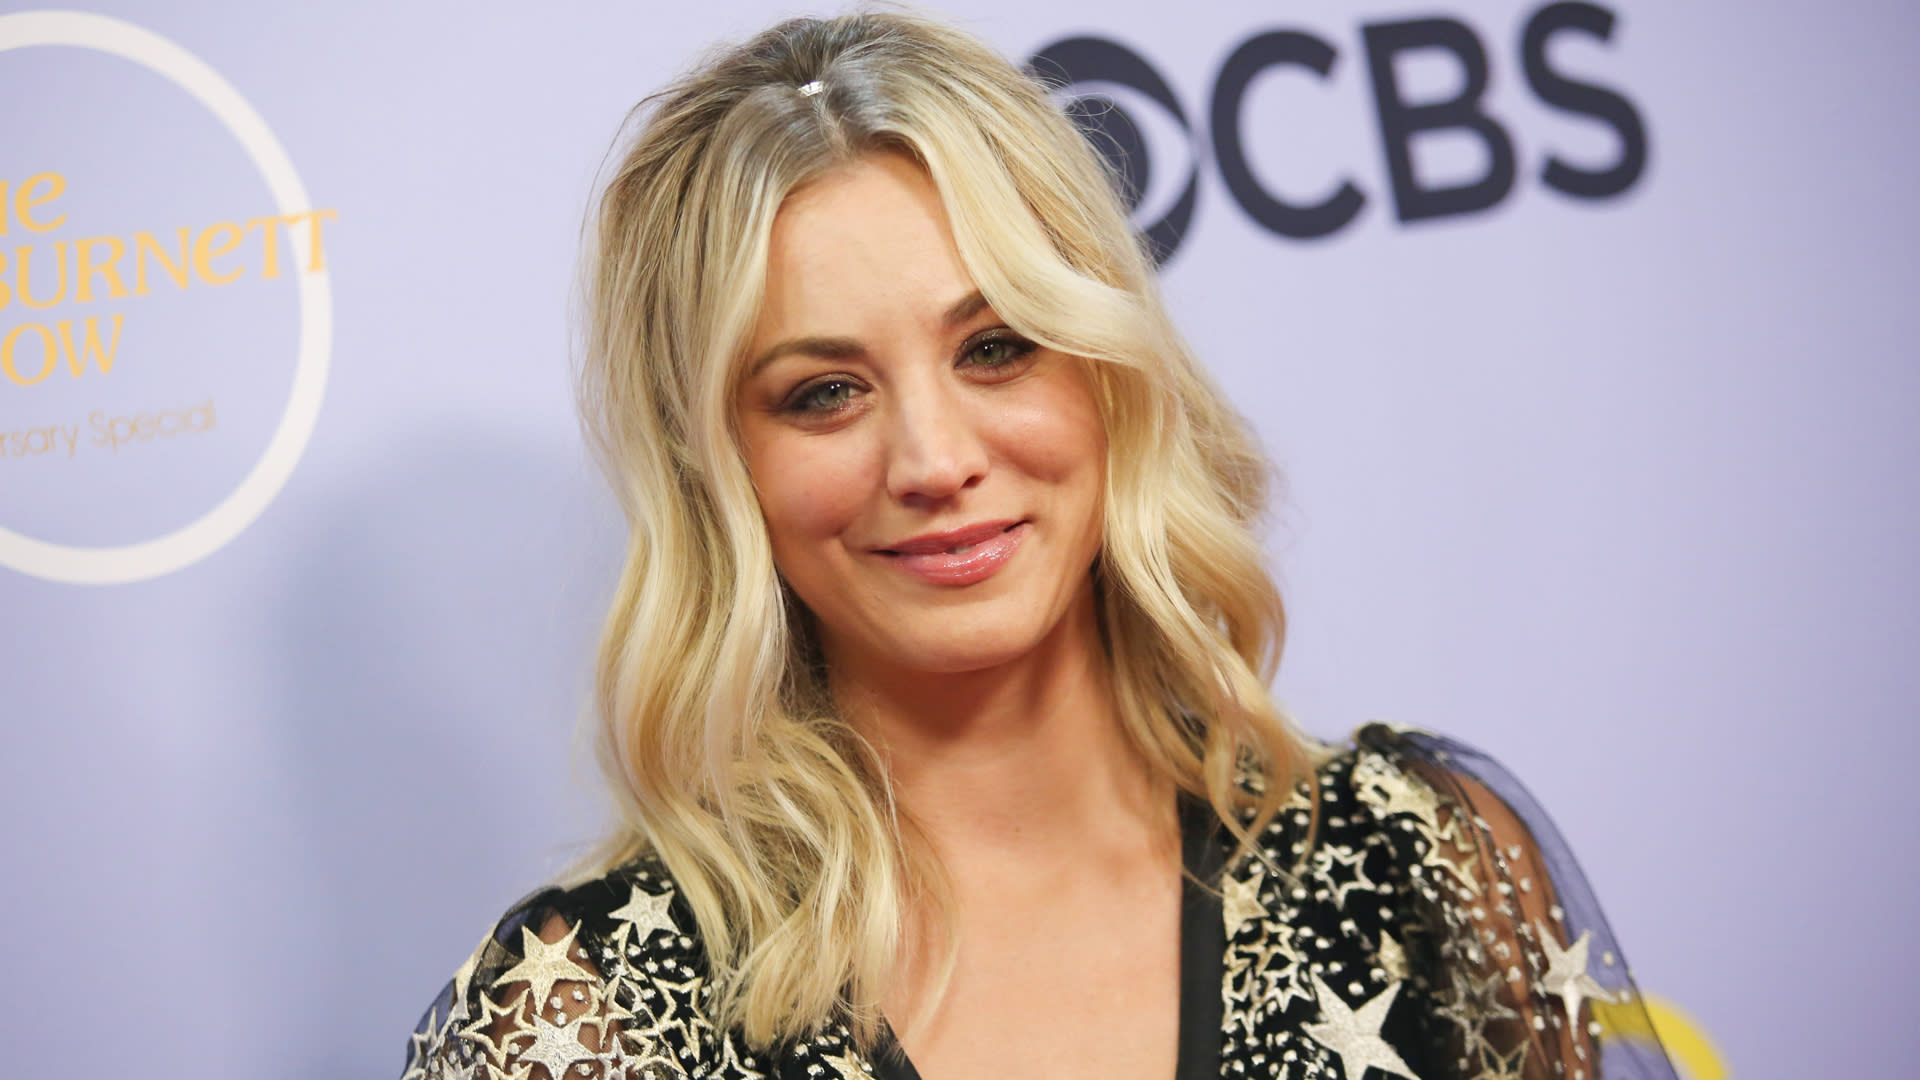 How Rich Is Kaley Cuoco?